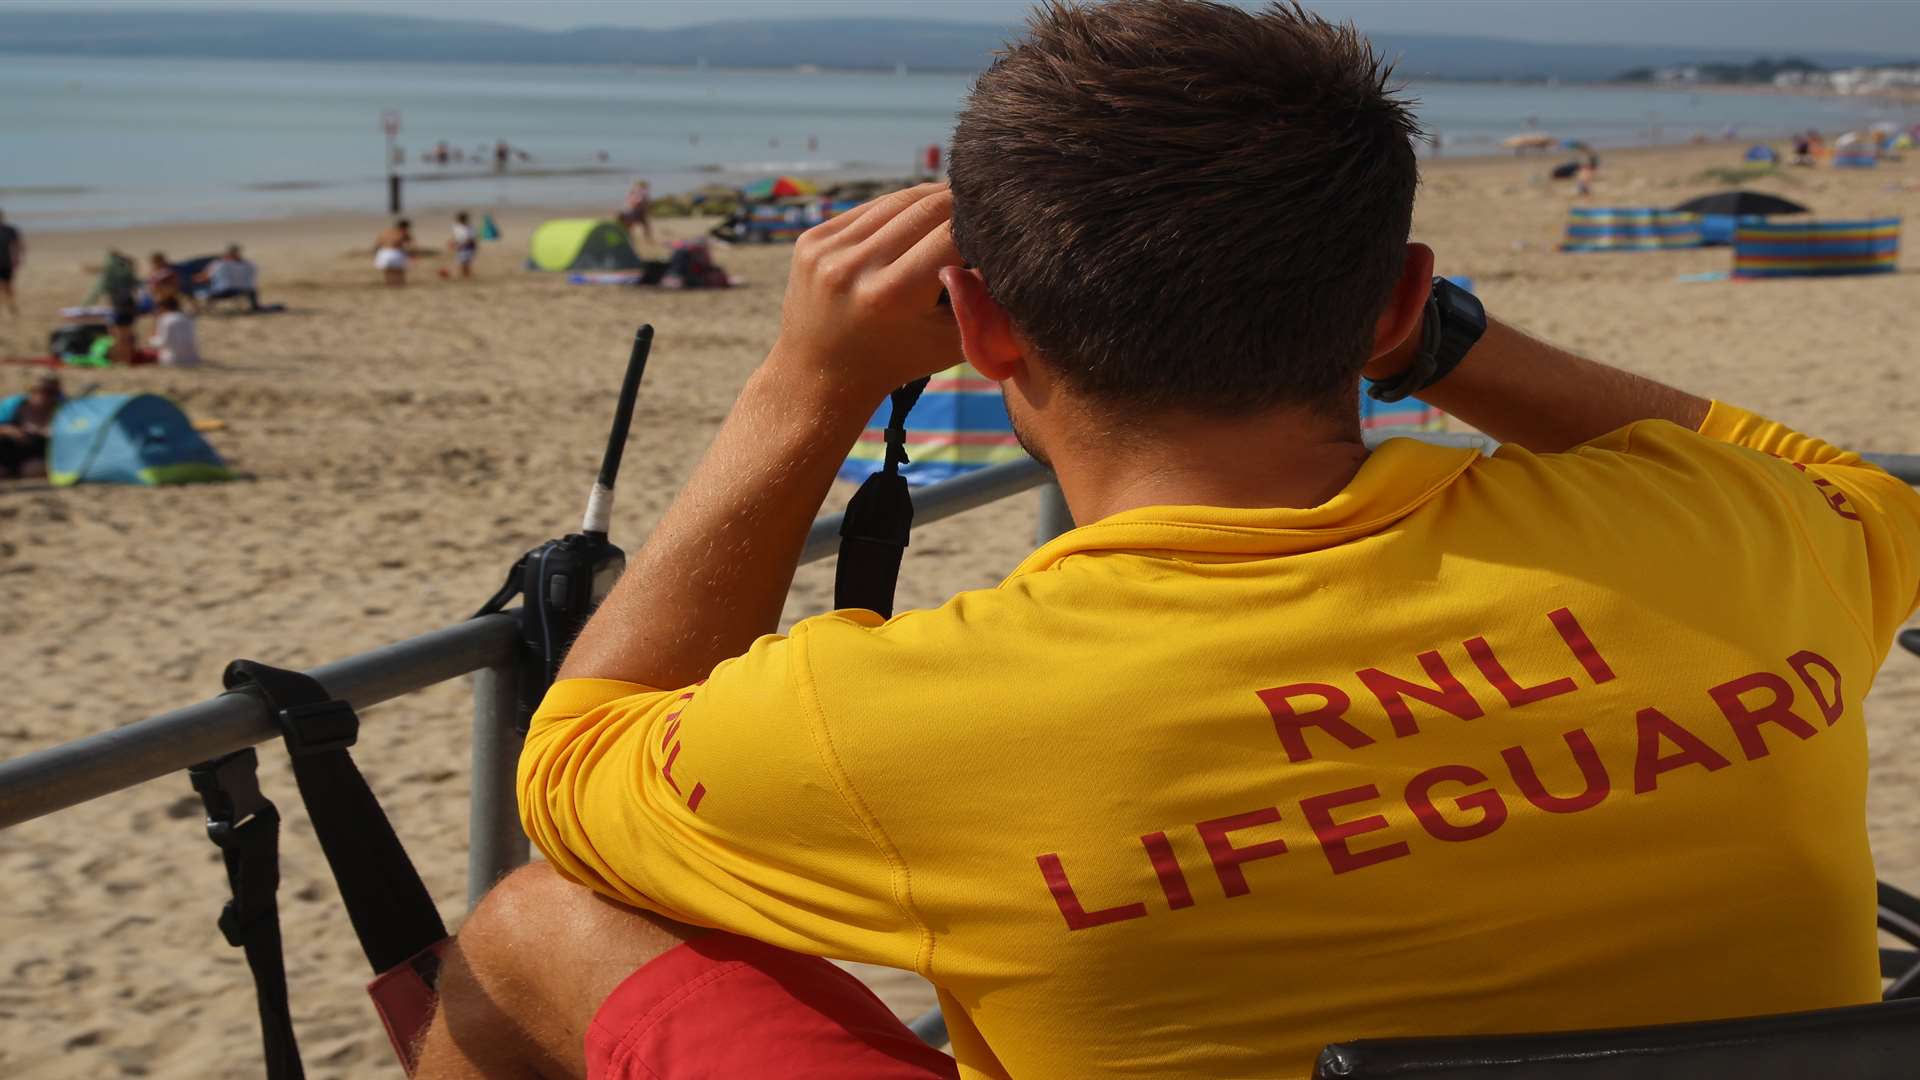 Lifeguard cover at Camber Sands. Picture: RNLI